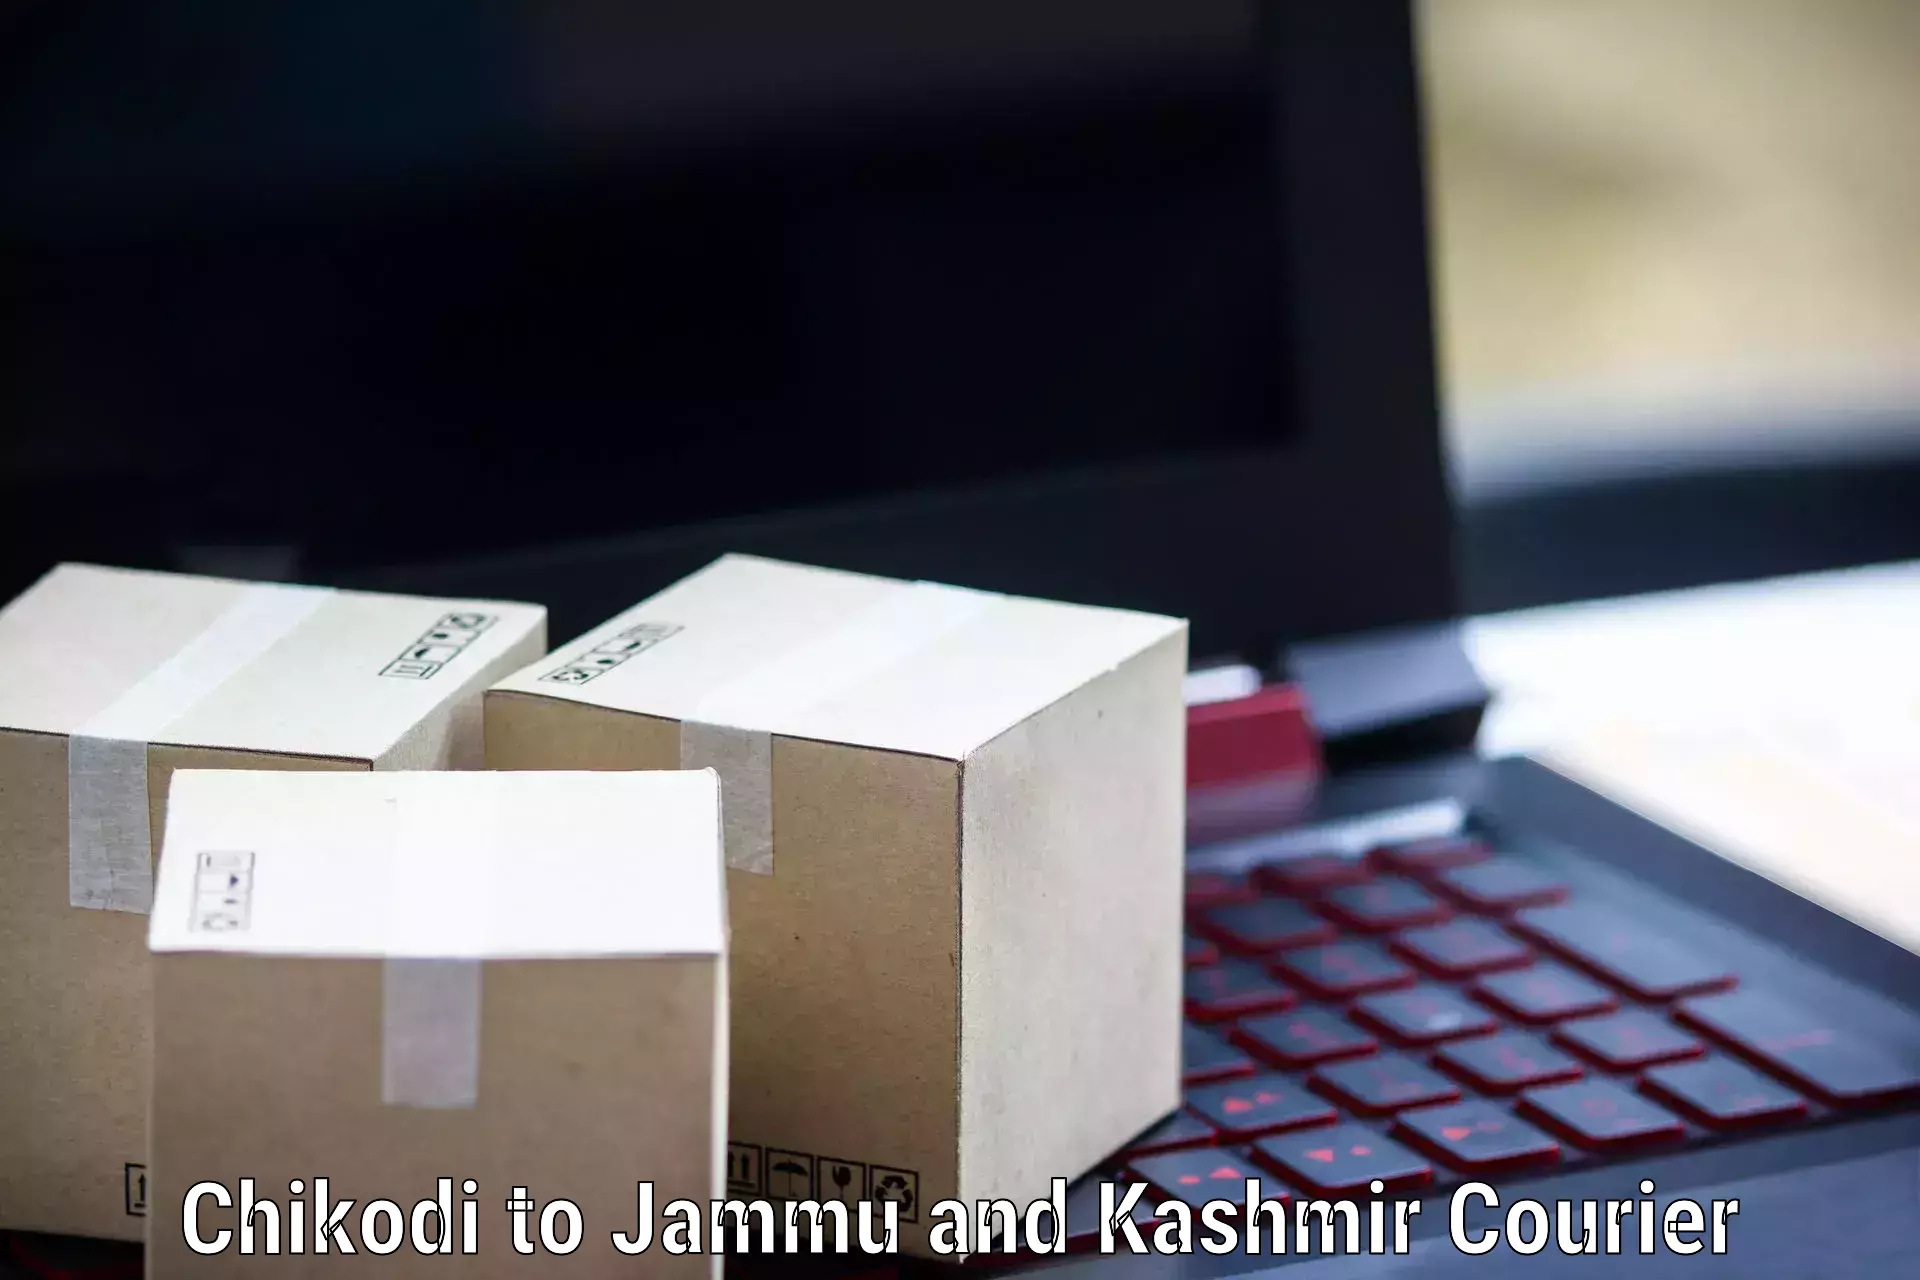 Automated parcel services Chikodi to Anantnag